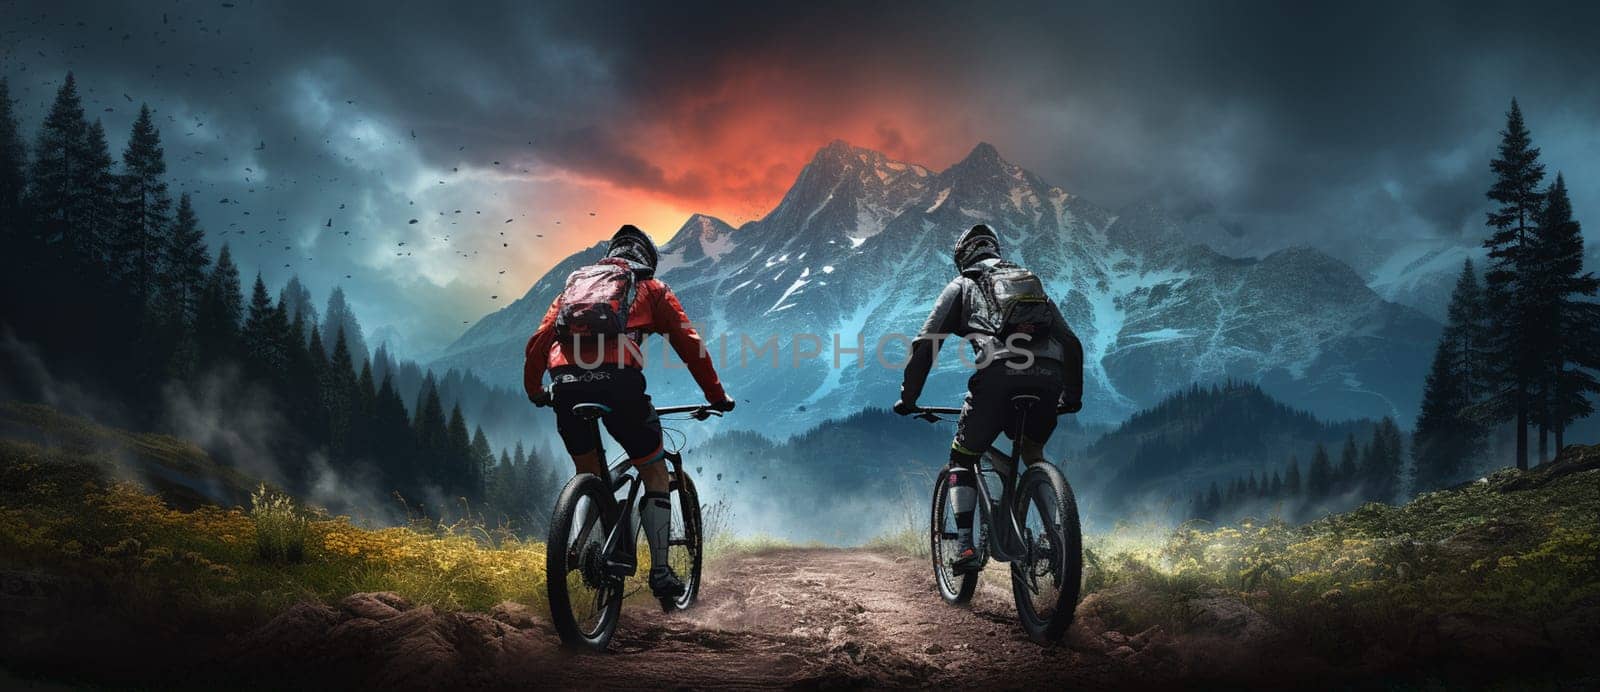 Cycling outdoor adventure in Dolomites. Cycling woman and man on electric mountain bikes in Dolomites landscape. Couple cycling MTB enduro trail track. Outdoor sport activity. by Andelov13